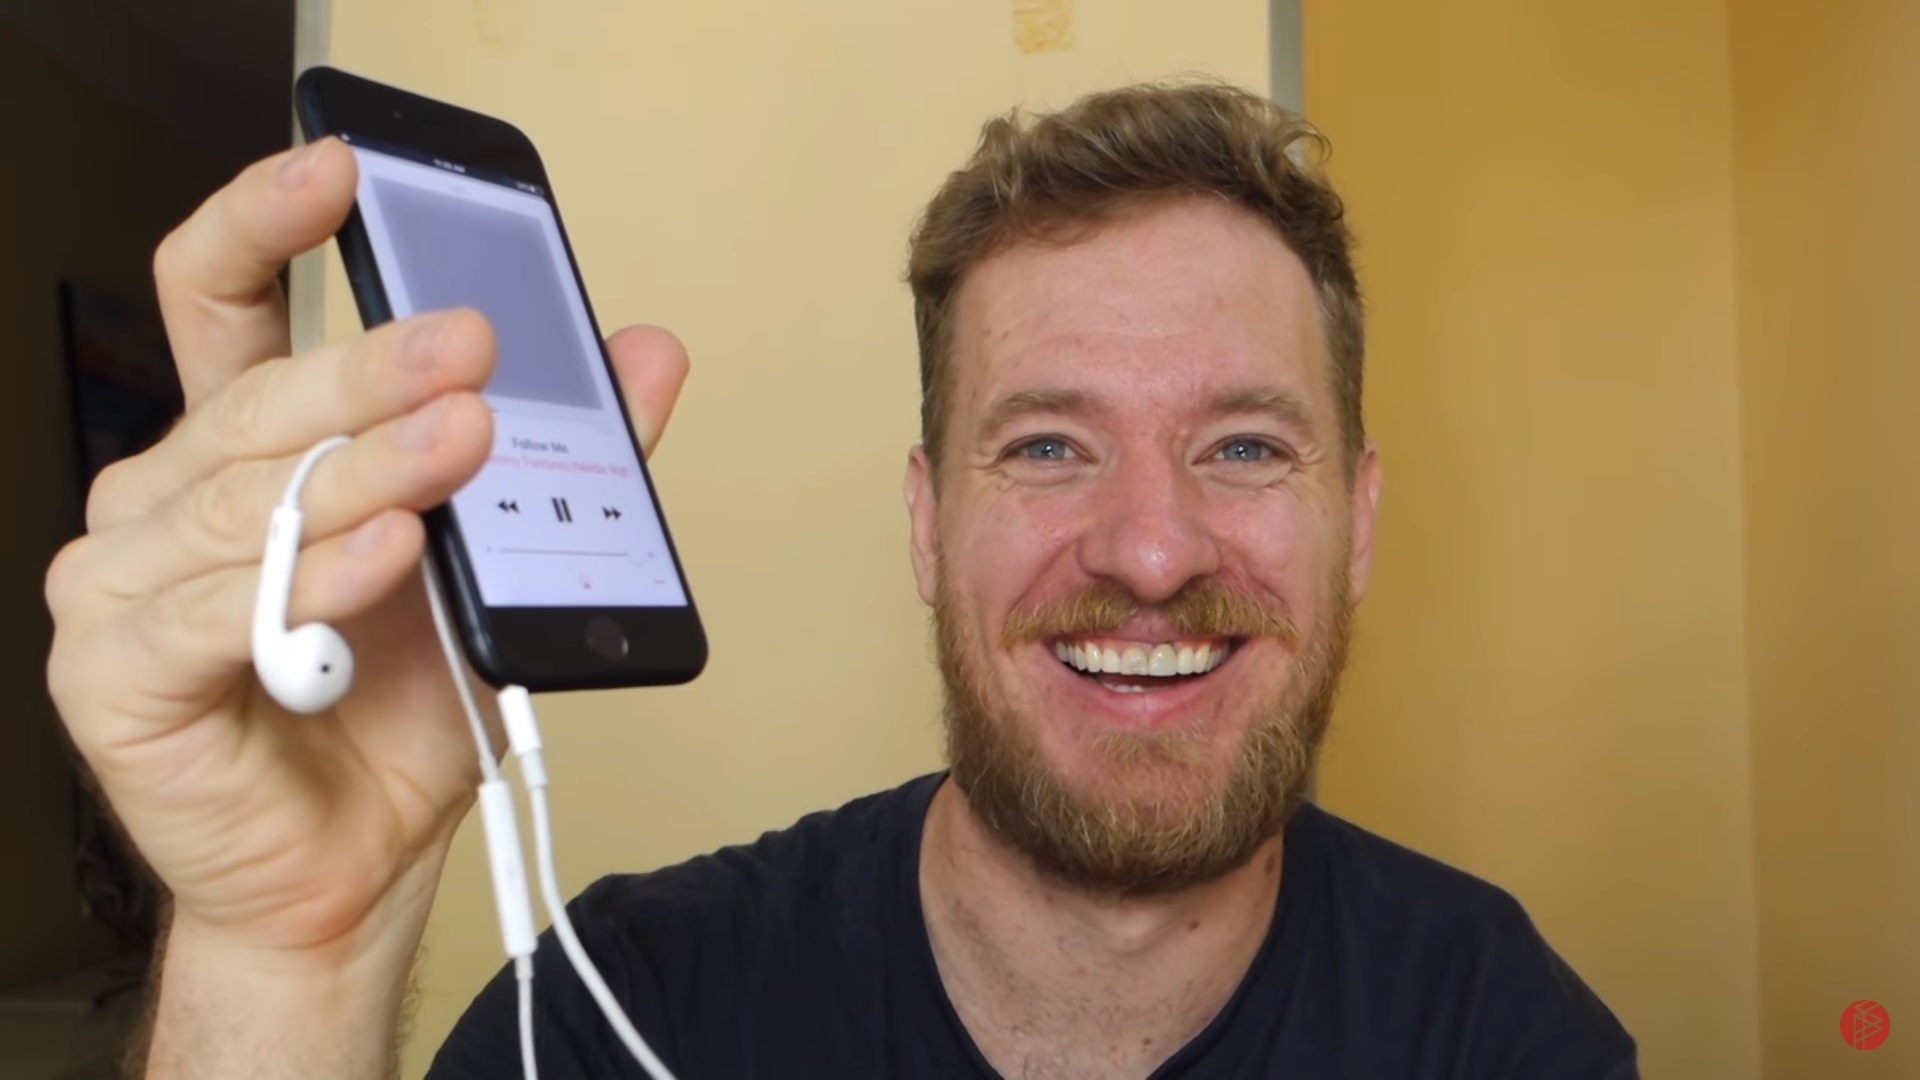 Scotty Allen does it again, now adding a 3.5mm headphone jack on an iPhone 7